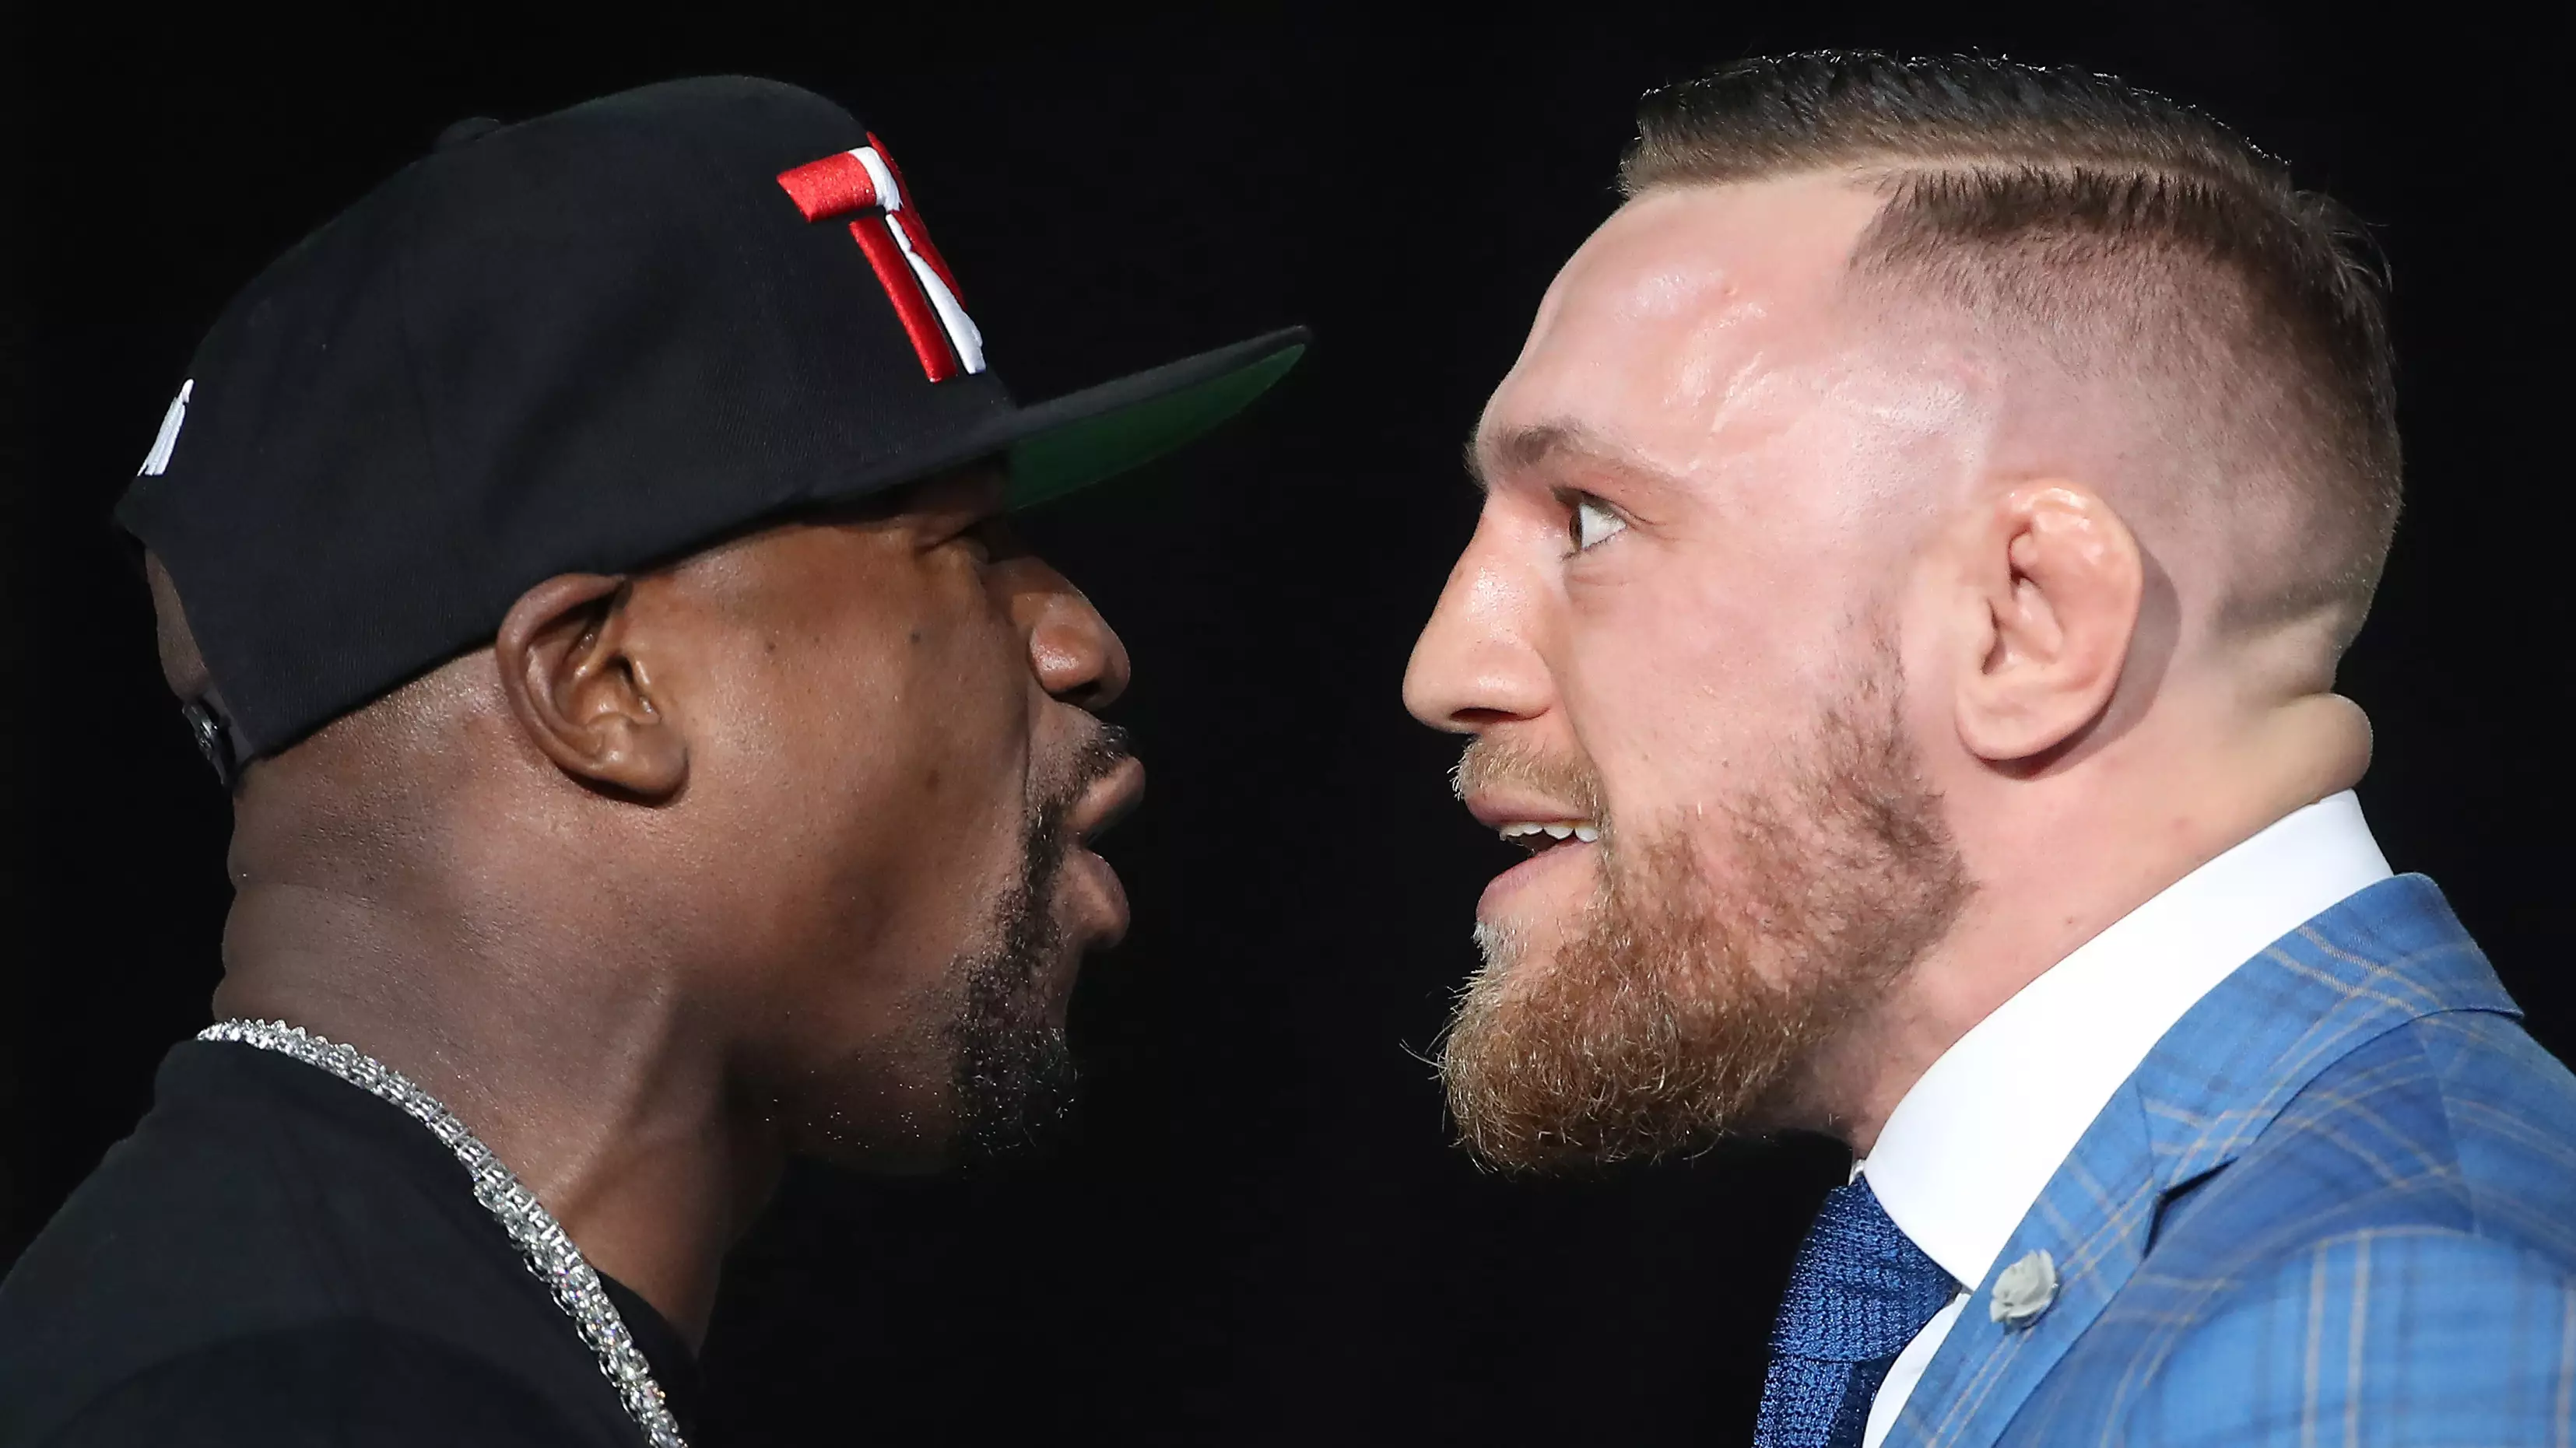 Mayweather Has Responded To McGregor By Calling Him 'Boy'